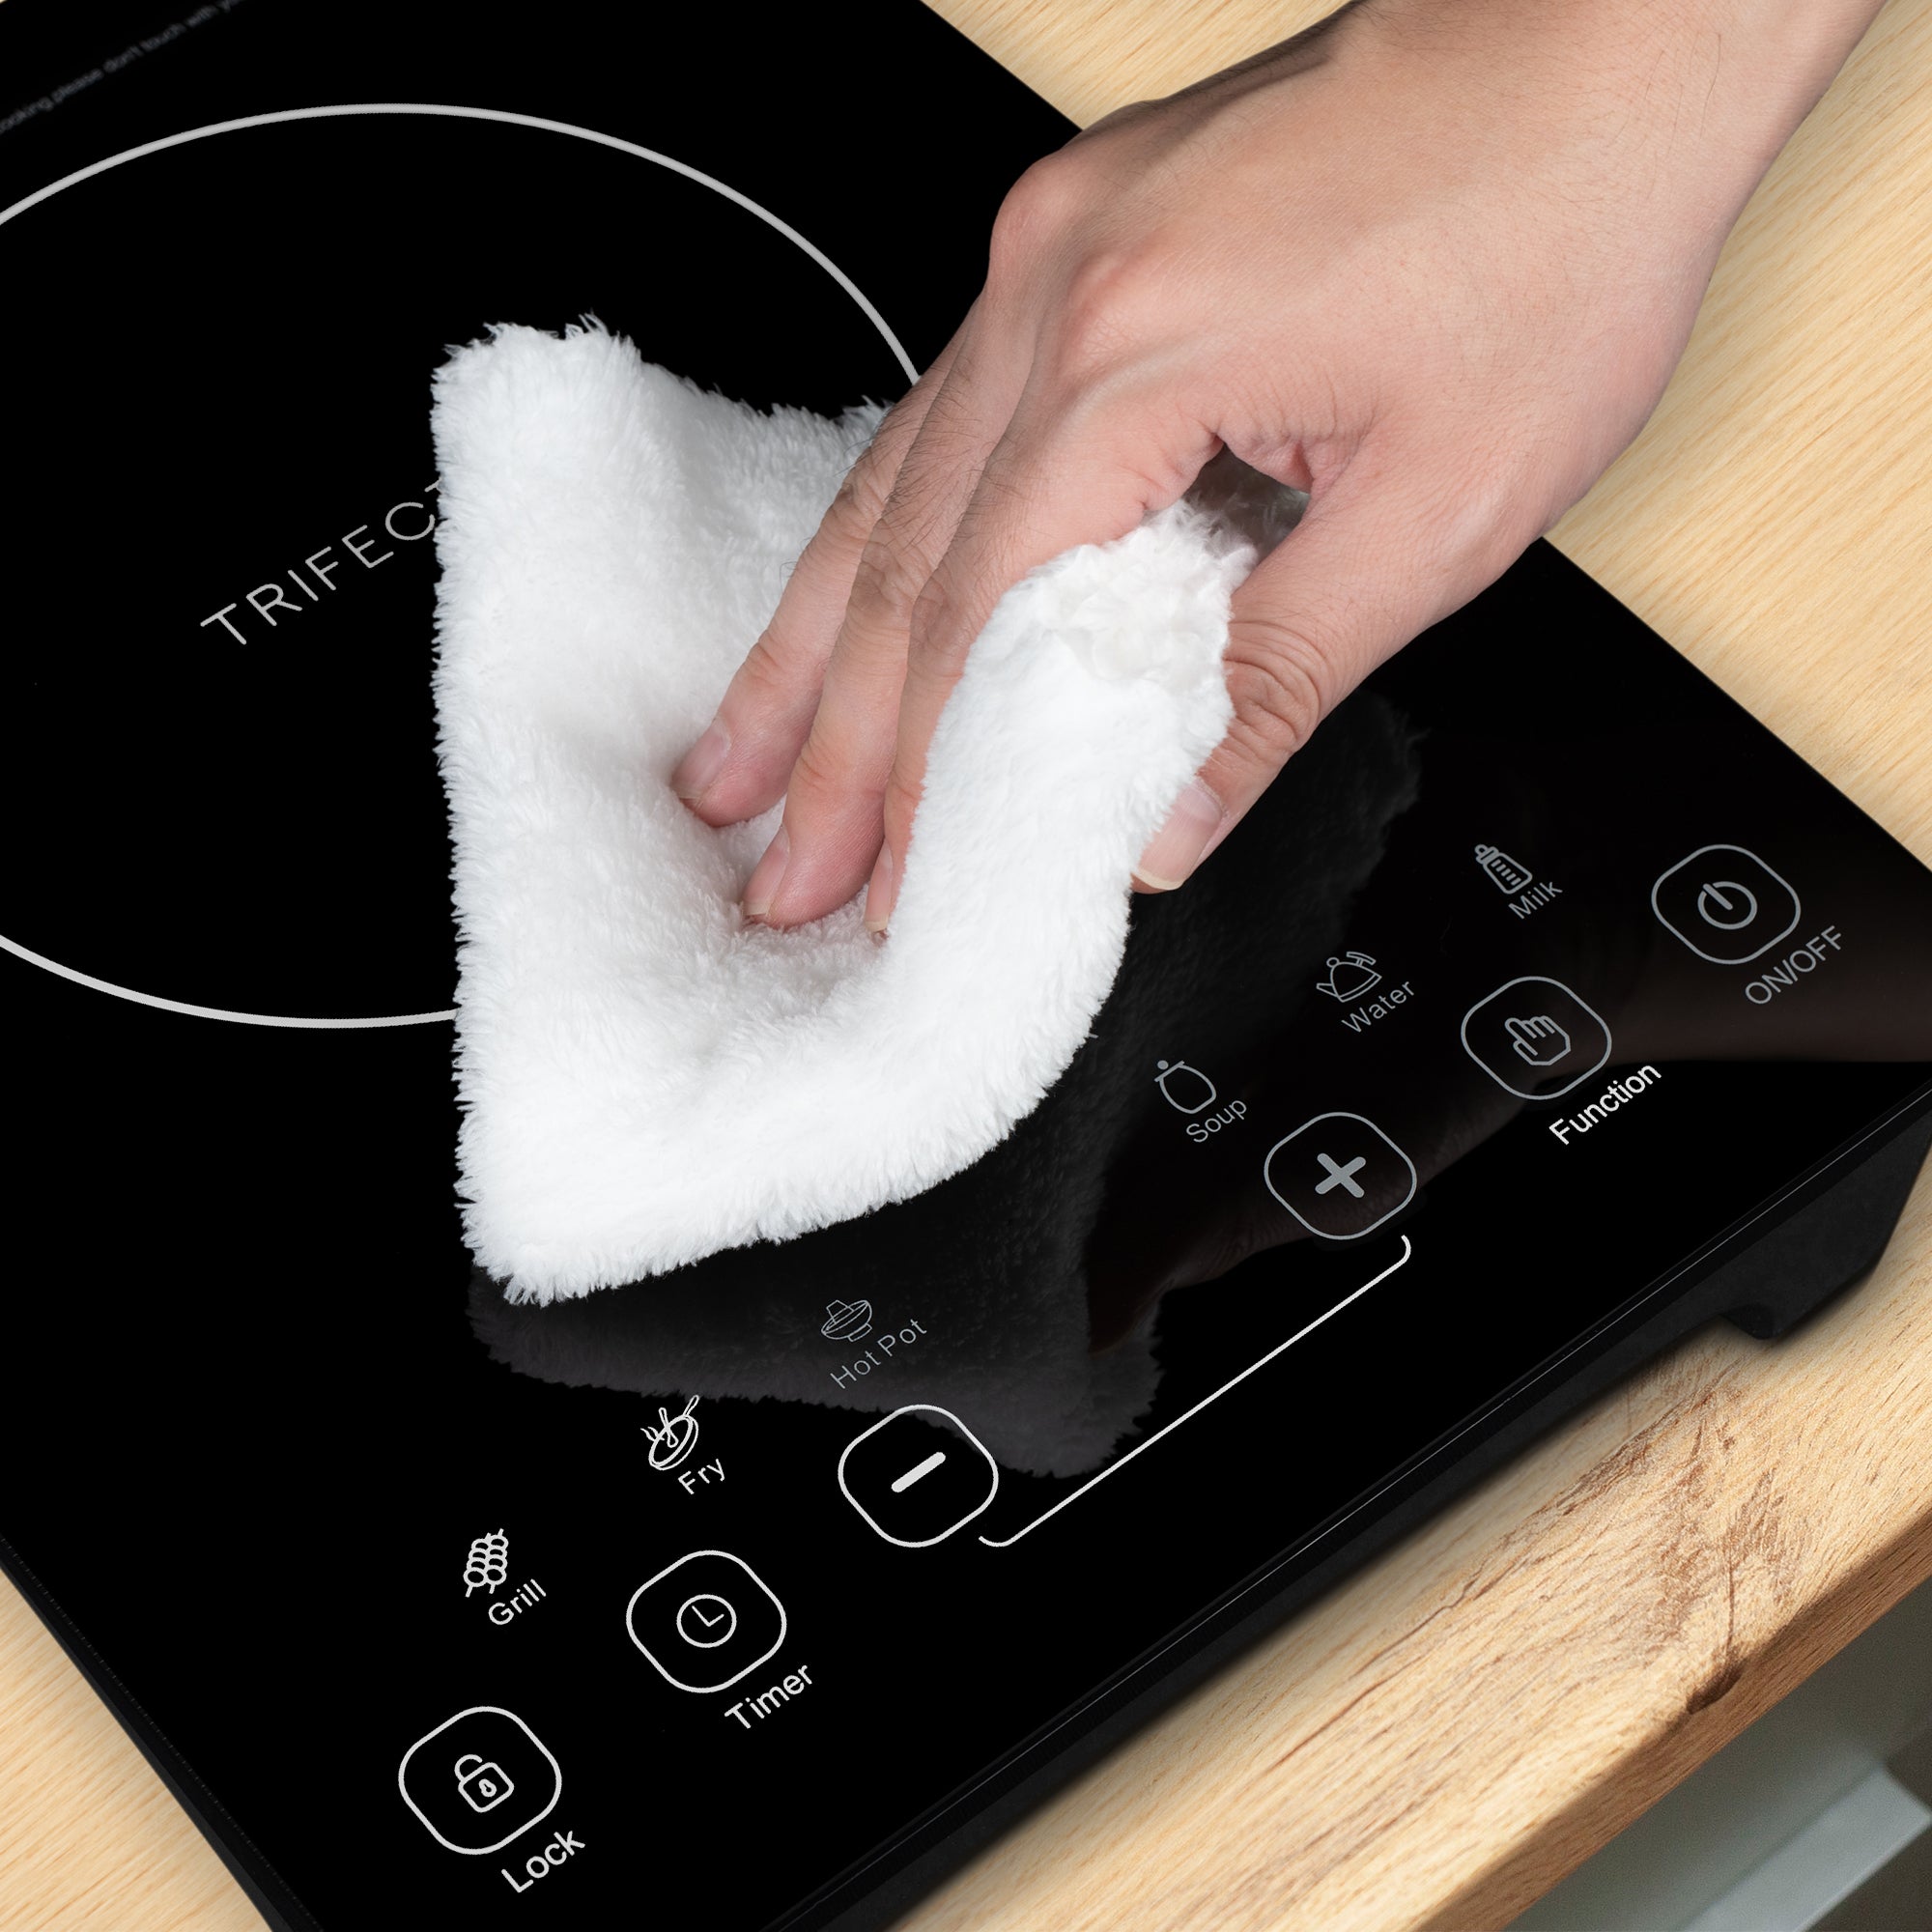 11inch portable induction cooktop hob boasts a sleek black glass-ceramic surface